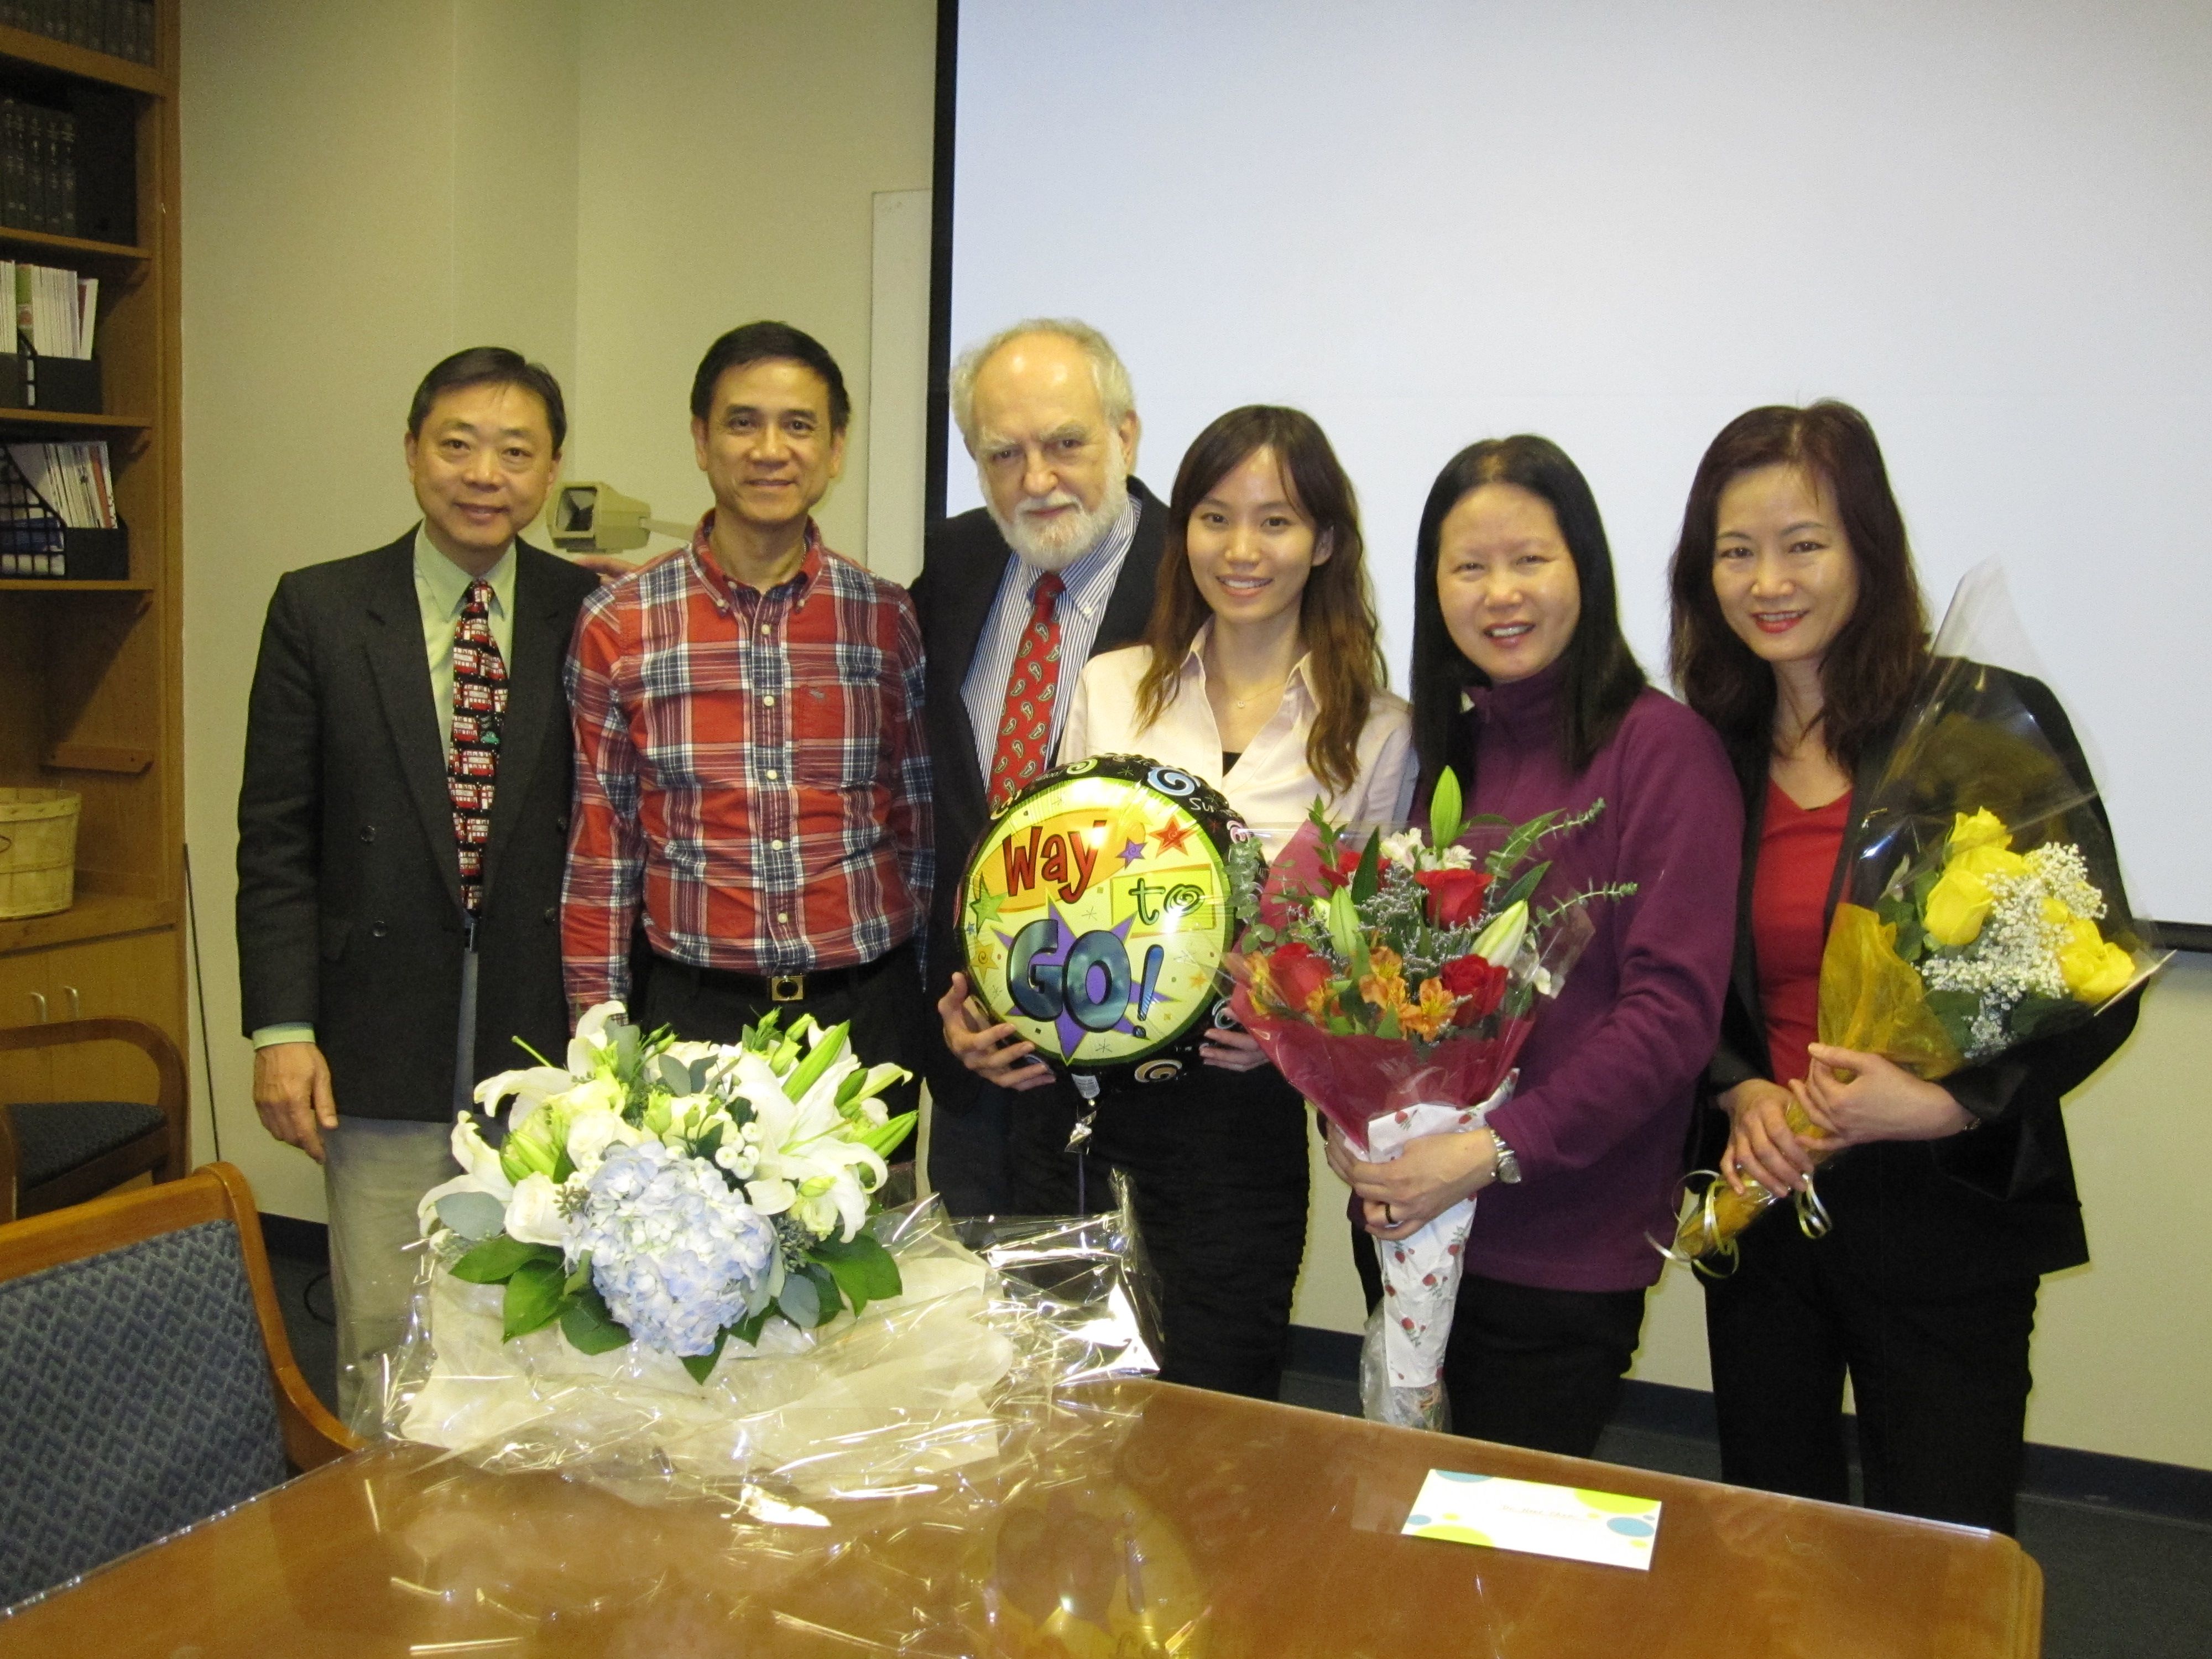 Chan with flowers and family at her defense.